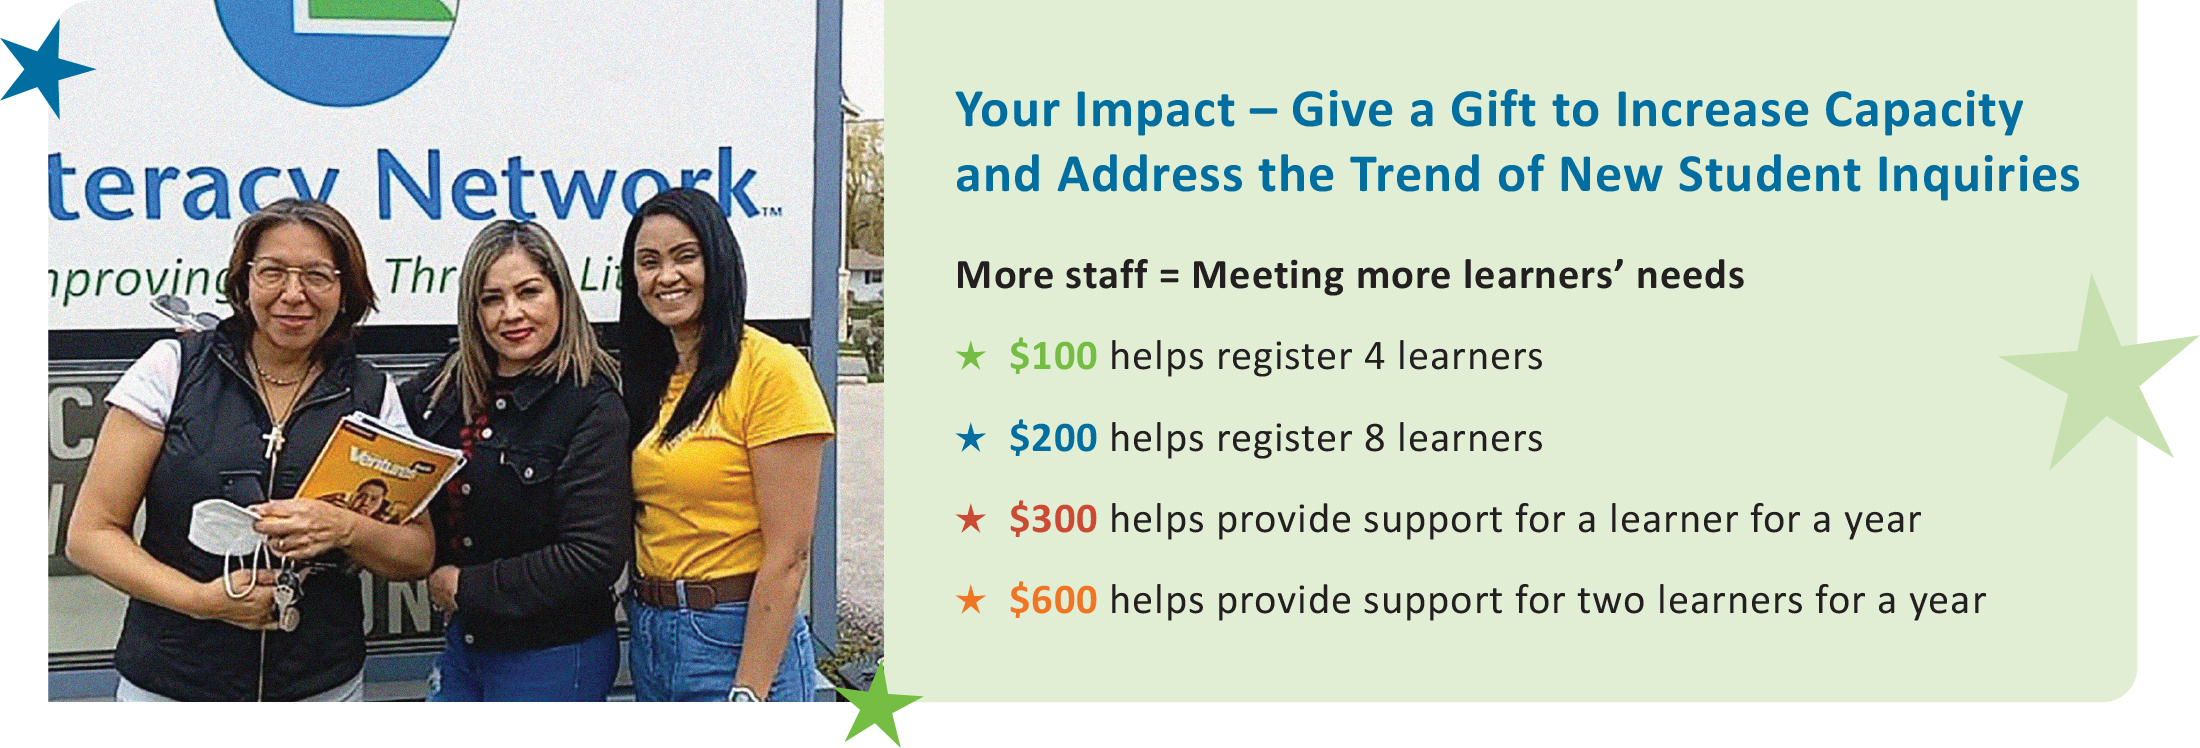 Give a Gift to Increase Capacity and Address the Trend of New Student Inquiries